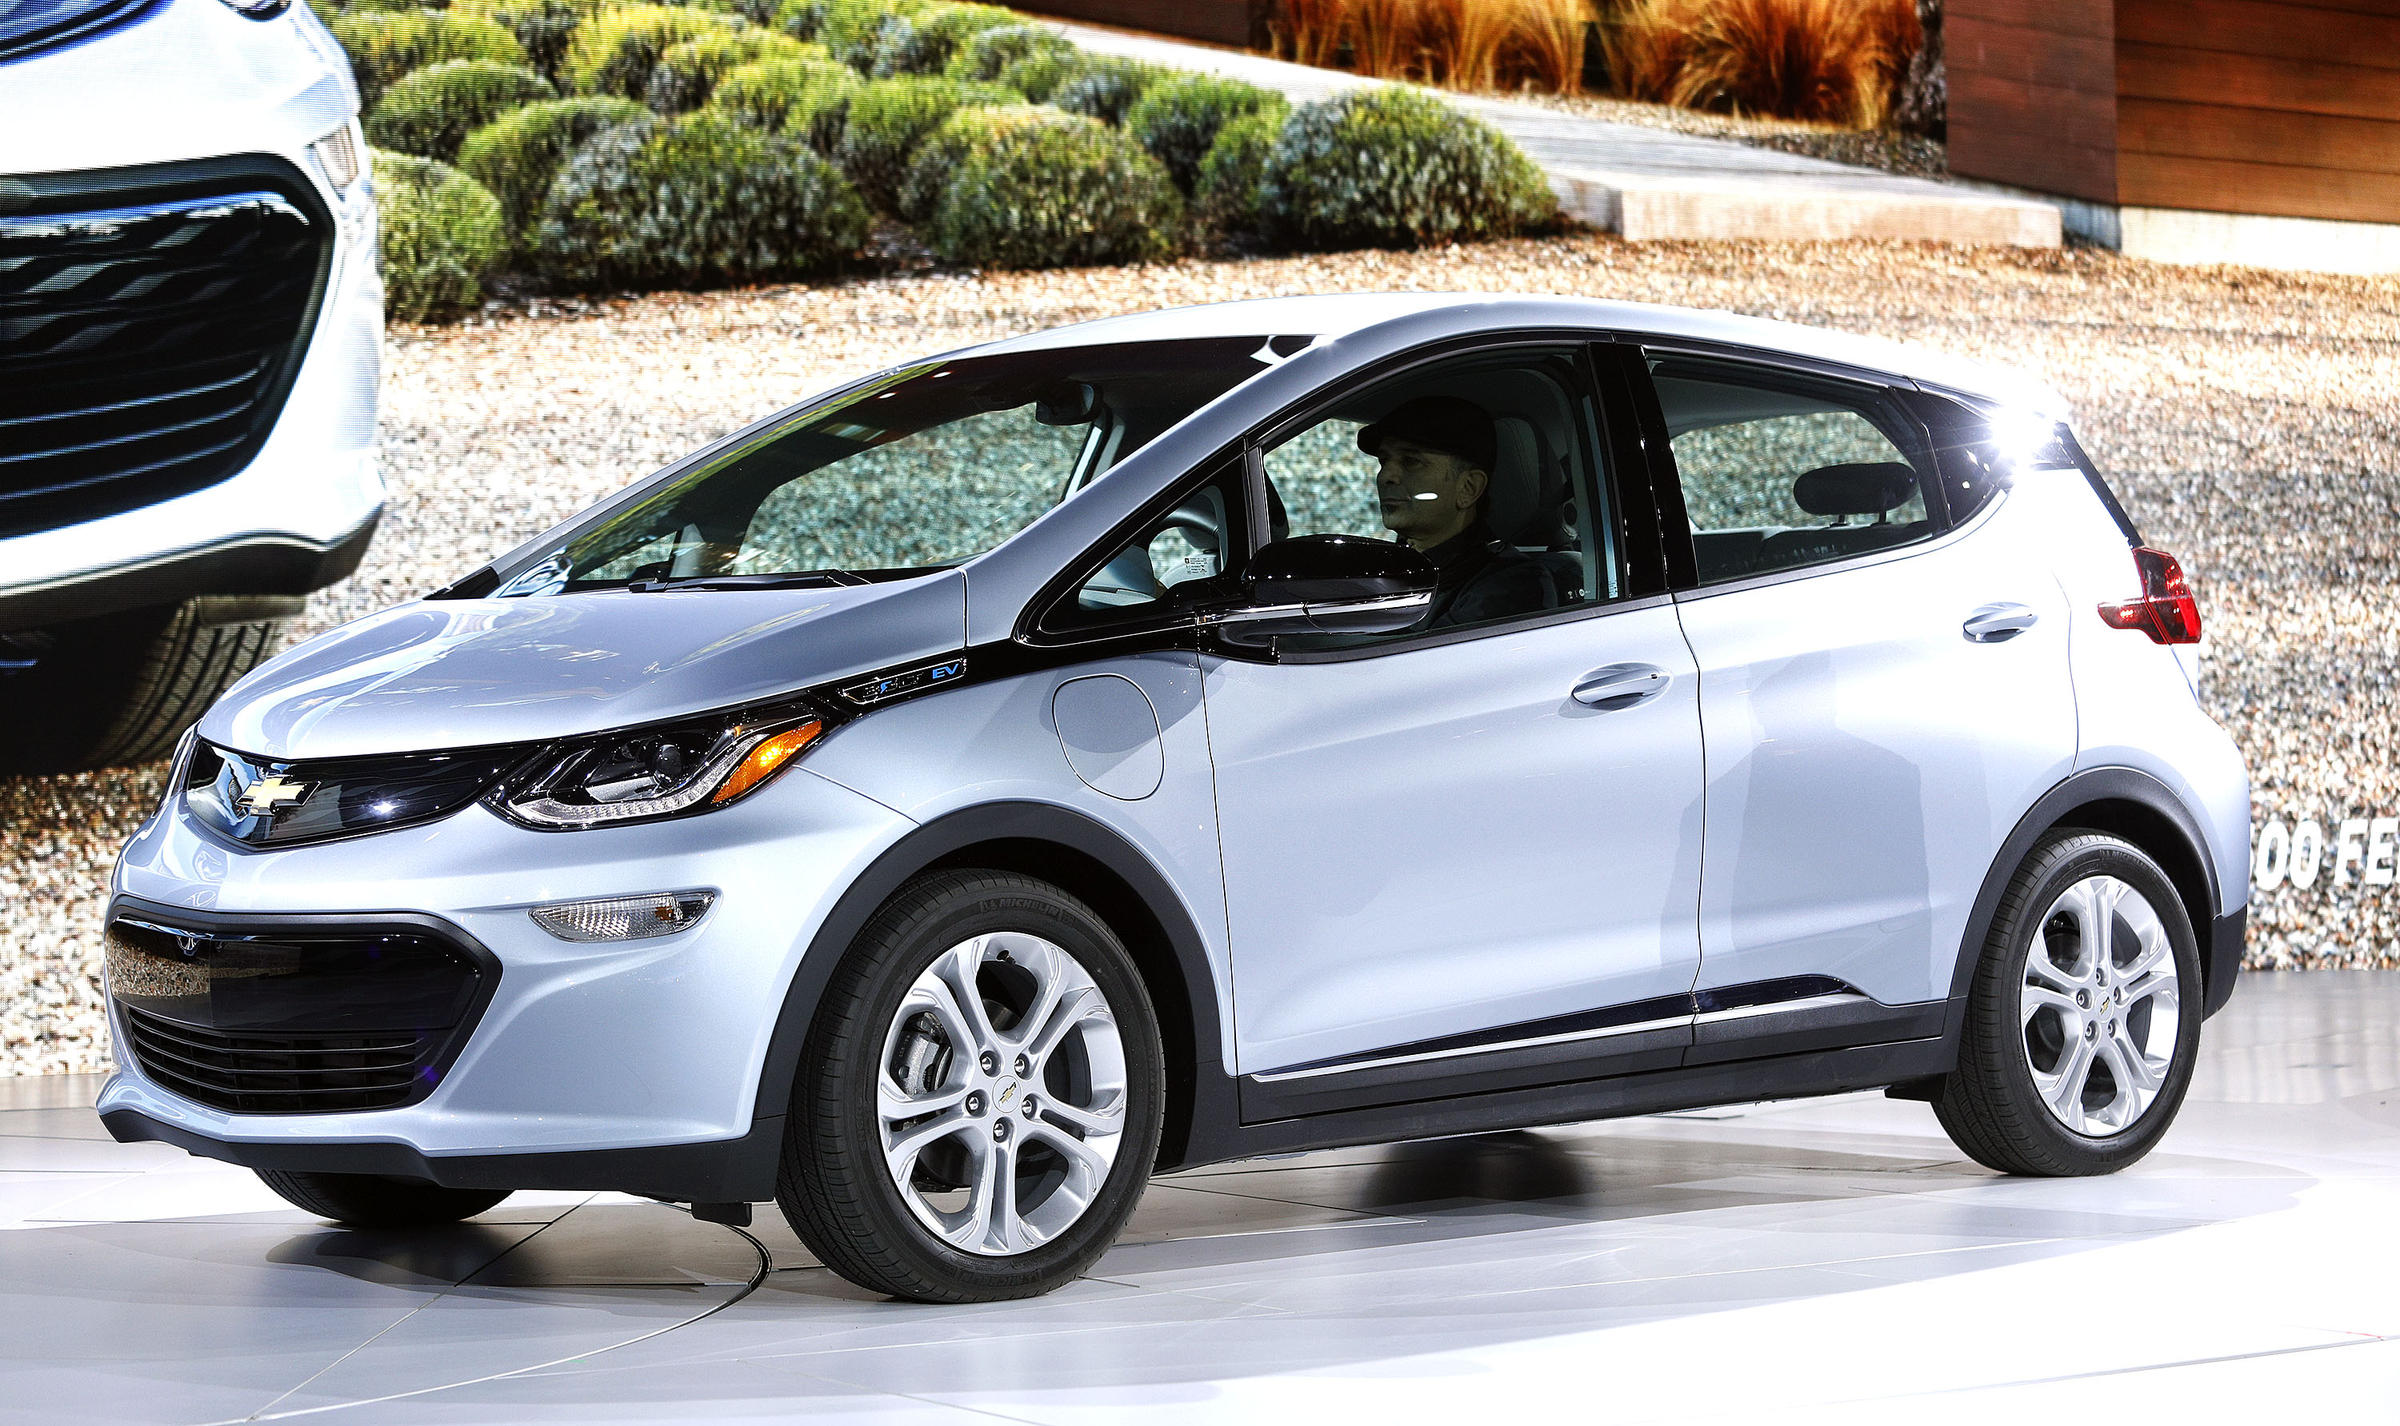 chevrolet bolt aims strike new consumers electric vehicle market